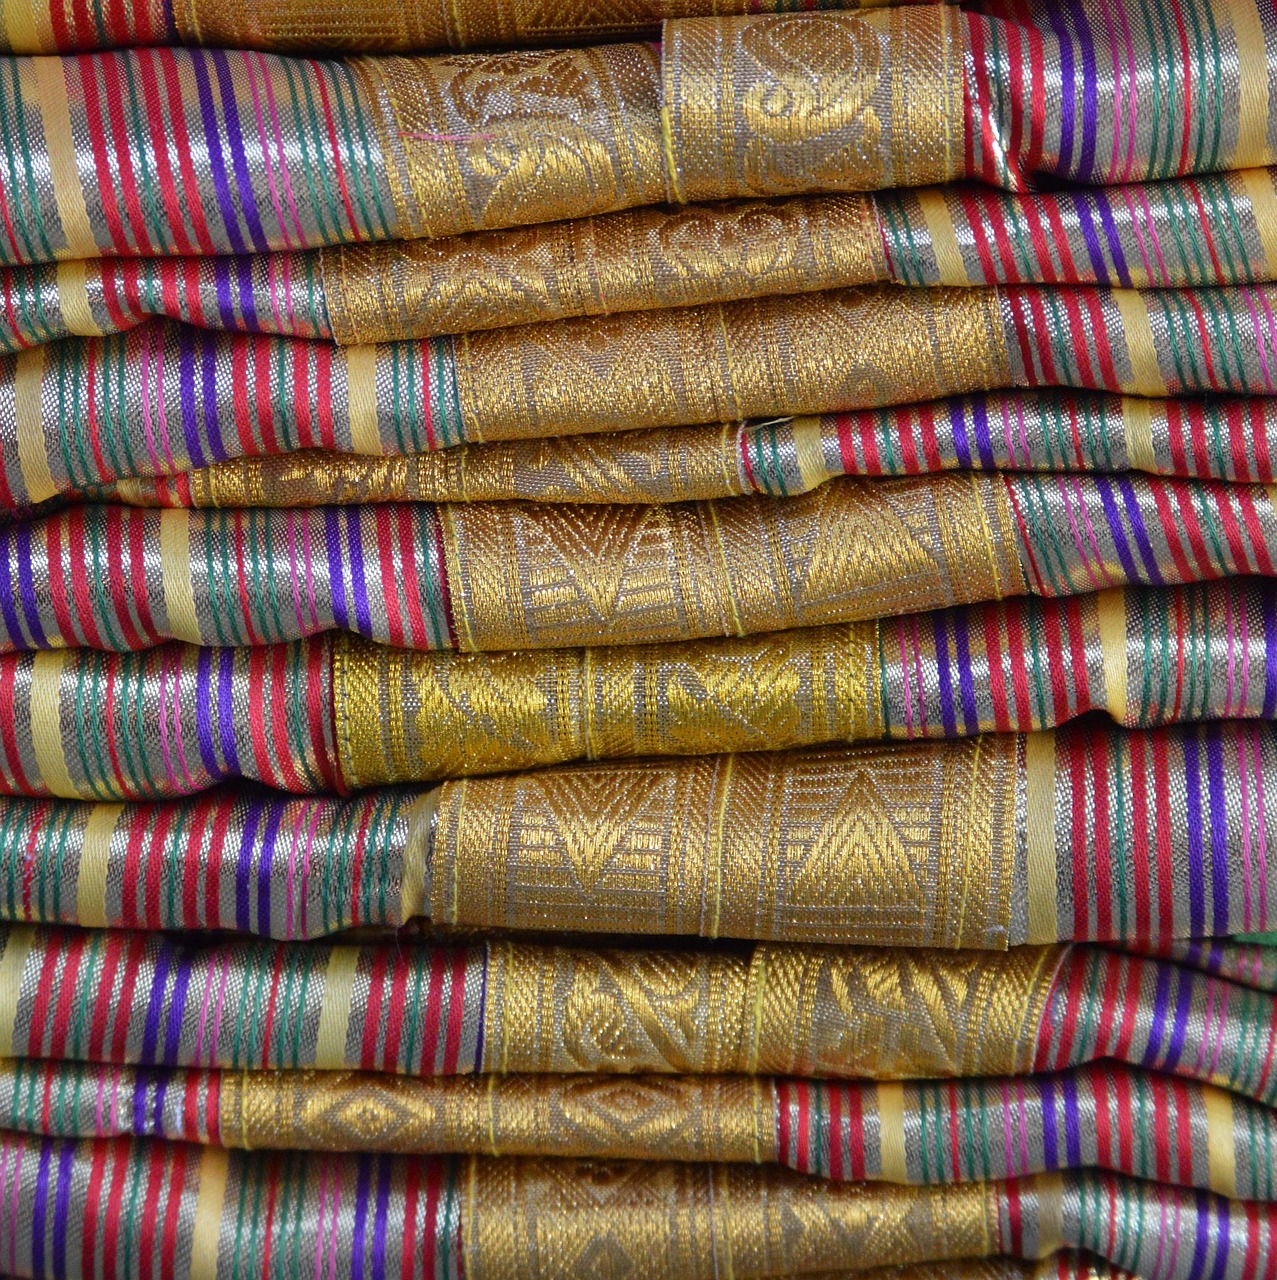 Vibrant display of Moroccan textiles in Marrakech Souks, showcasing a rich array of colors, patterns, and traditional weaving techniques